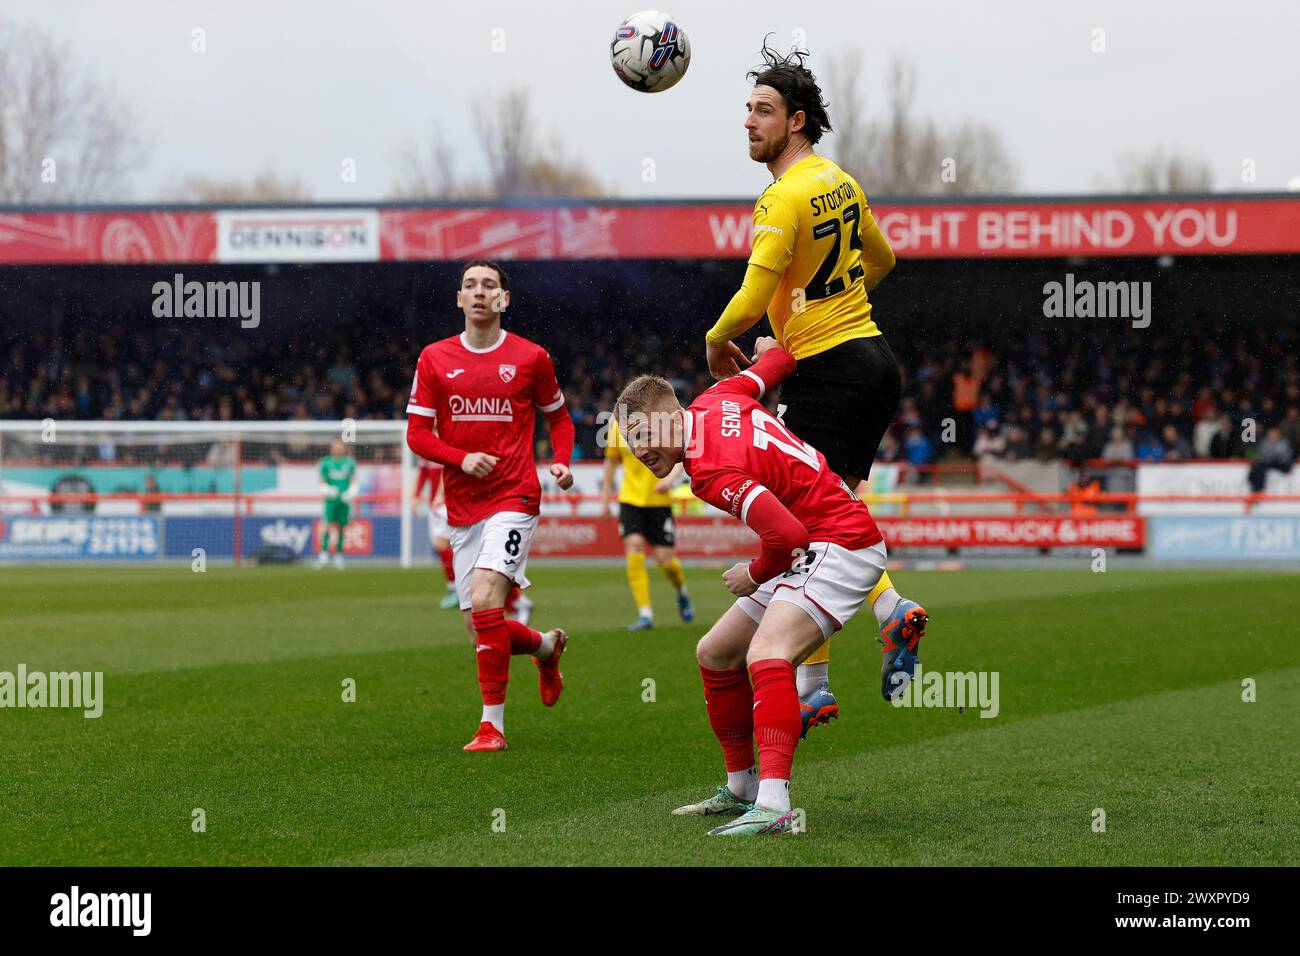 Morecambe on Monday 1st April 2024. Barrow's Cole Stockton challenges for a header with Morecambe's Joel Senior during the Sky Bet League 2 match between Morecambe and Barrow at the Globe Arena, Morecambe on Monday 1st April 2024. (Photo: Mark Fletcher | MI News) Credit: MI News & Sport /Alamy Live News Stock Photo